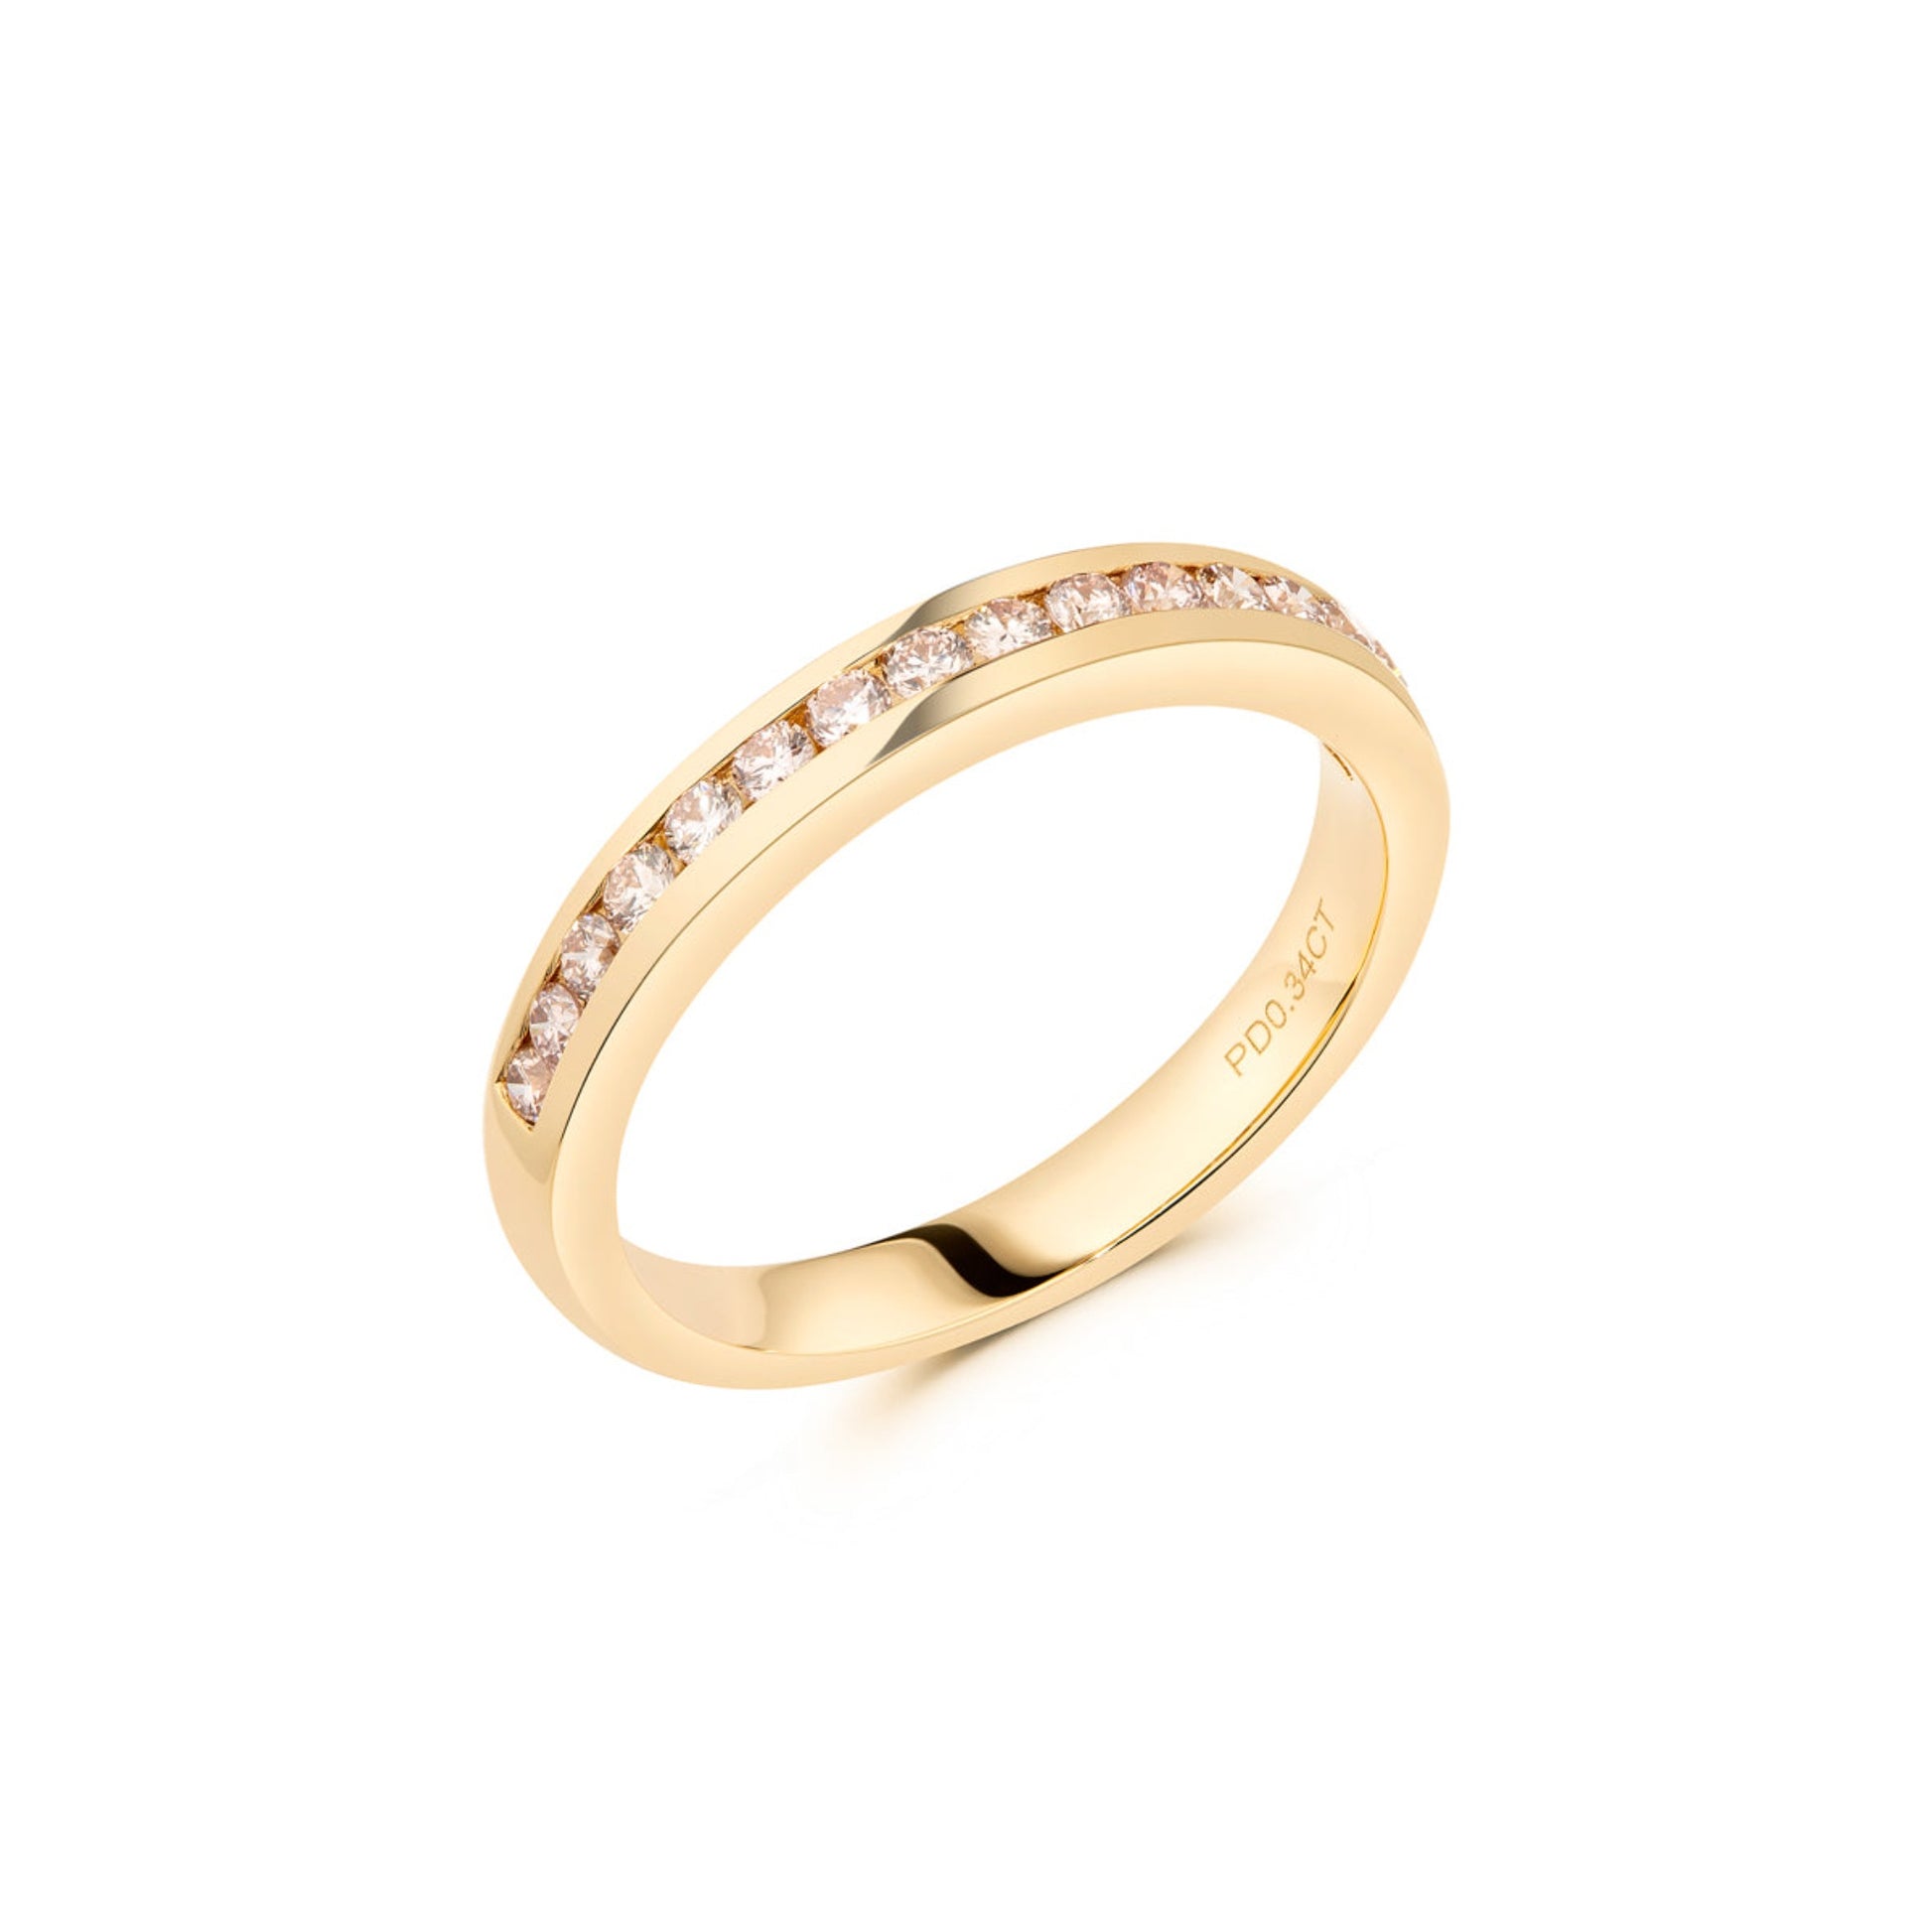 Eminence Pinks Channel Set Band | 18ct Yellow Gold